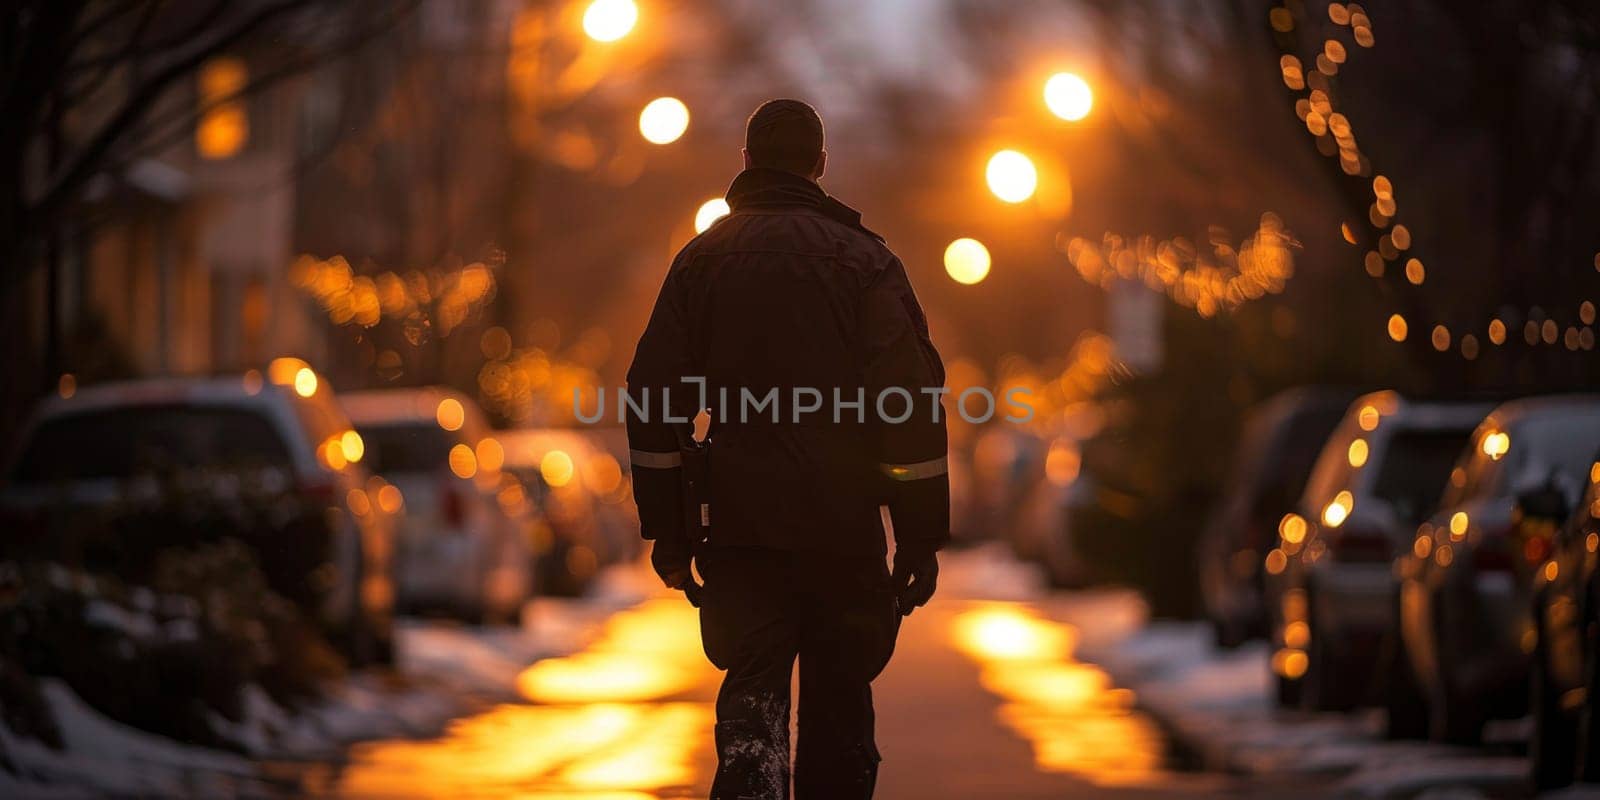 A man in winter clothing rides a bike on a street covered in snow.